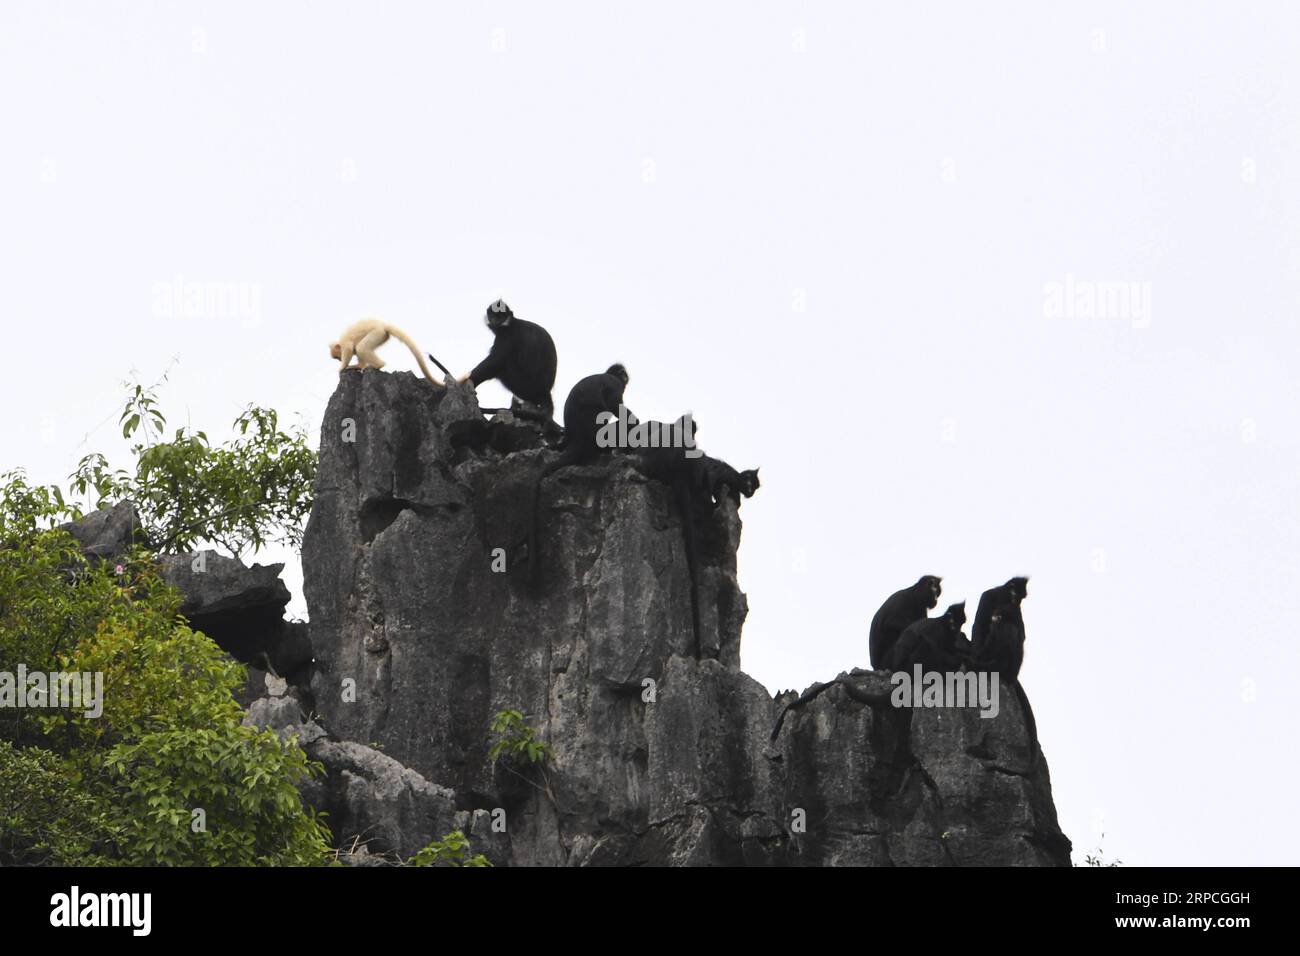 (190704) -- DAXIN, July 4, 2019 -- An albino baby Francois langur and other Francois langurs are seen on a mountain at Baoxin Village in Daxin County, south China s Guangxi Zhuang Autonomous Region, July 4, 2019. The second albino Francois langur was discovered Thursday in Guangxi since 2017 when the first was observed. At present, there are less than 2,000 Francois langurs worldwide. In China, they are found in Guangxi, Guizhou and Chongqing. Also known as Francois leaf monkeys, the species is one of China s most endangered wild animals and is under top national-level protection. ) CHINA-GUAN Stock Photo